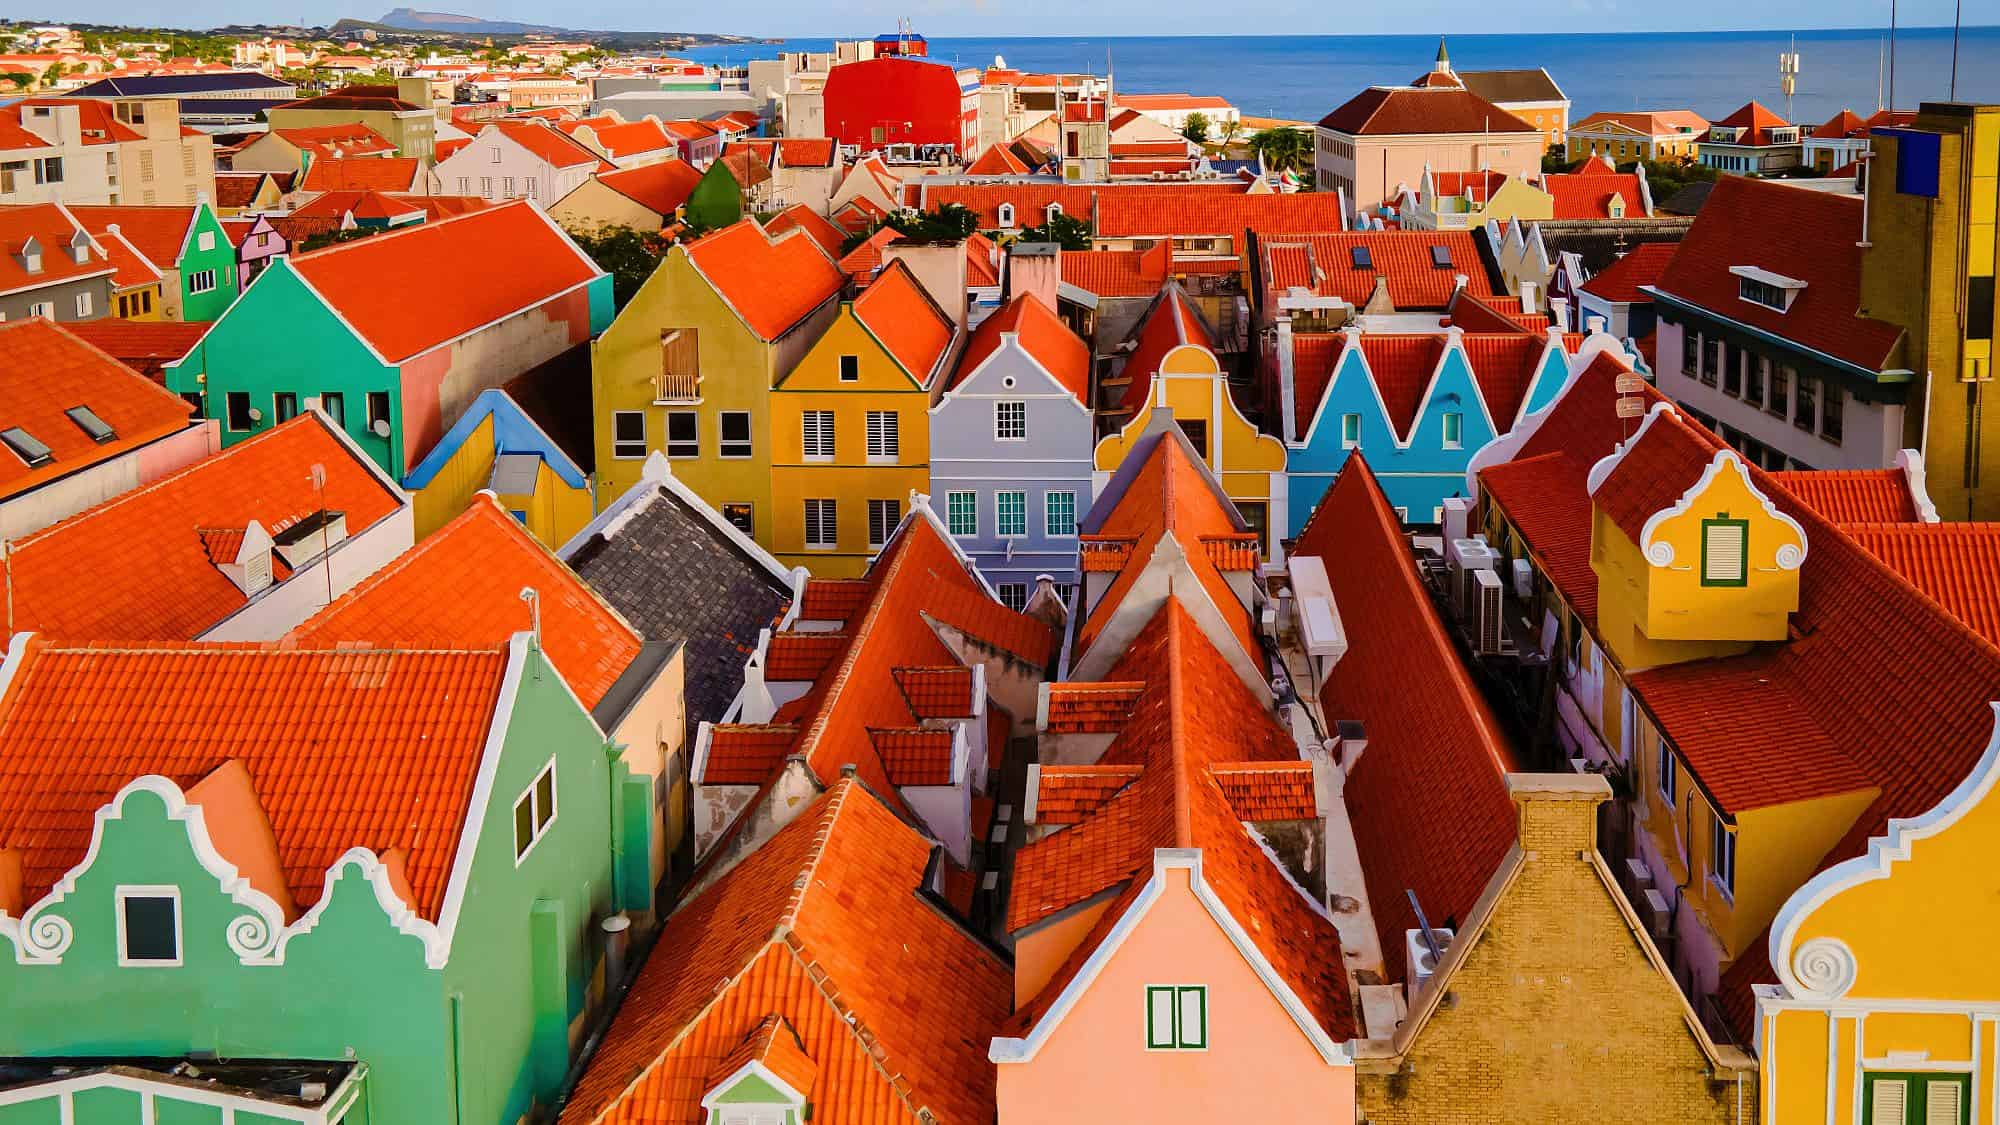 The colorful homes and buildings in Willemstad, the capital of Curaçao, in the Dutch Antilles. Credit: Fokke Baarssen/Shutterstock.